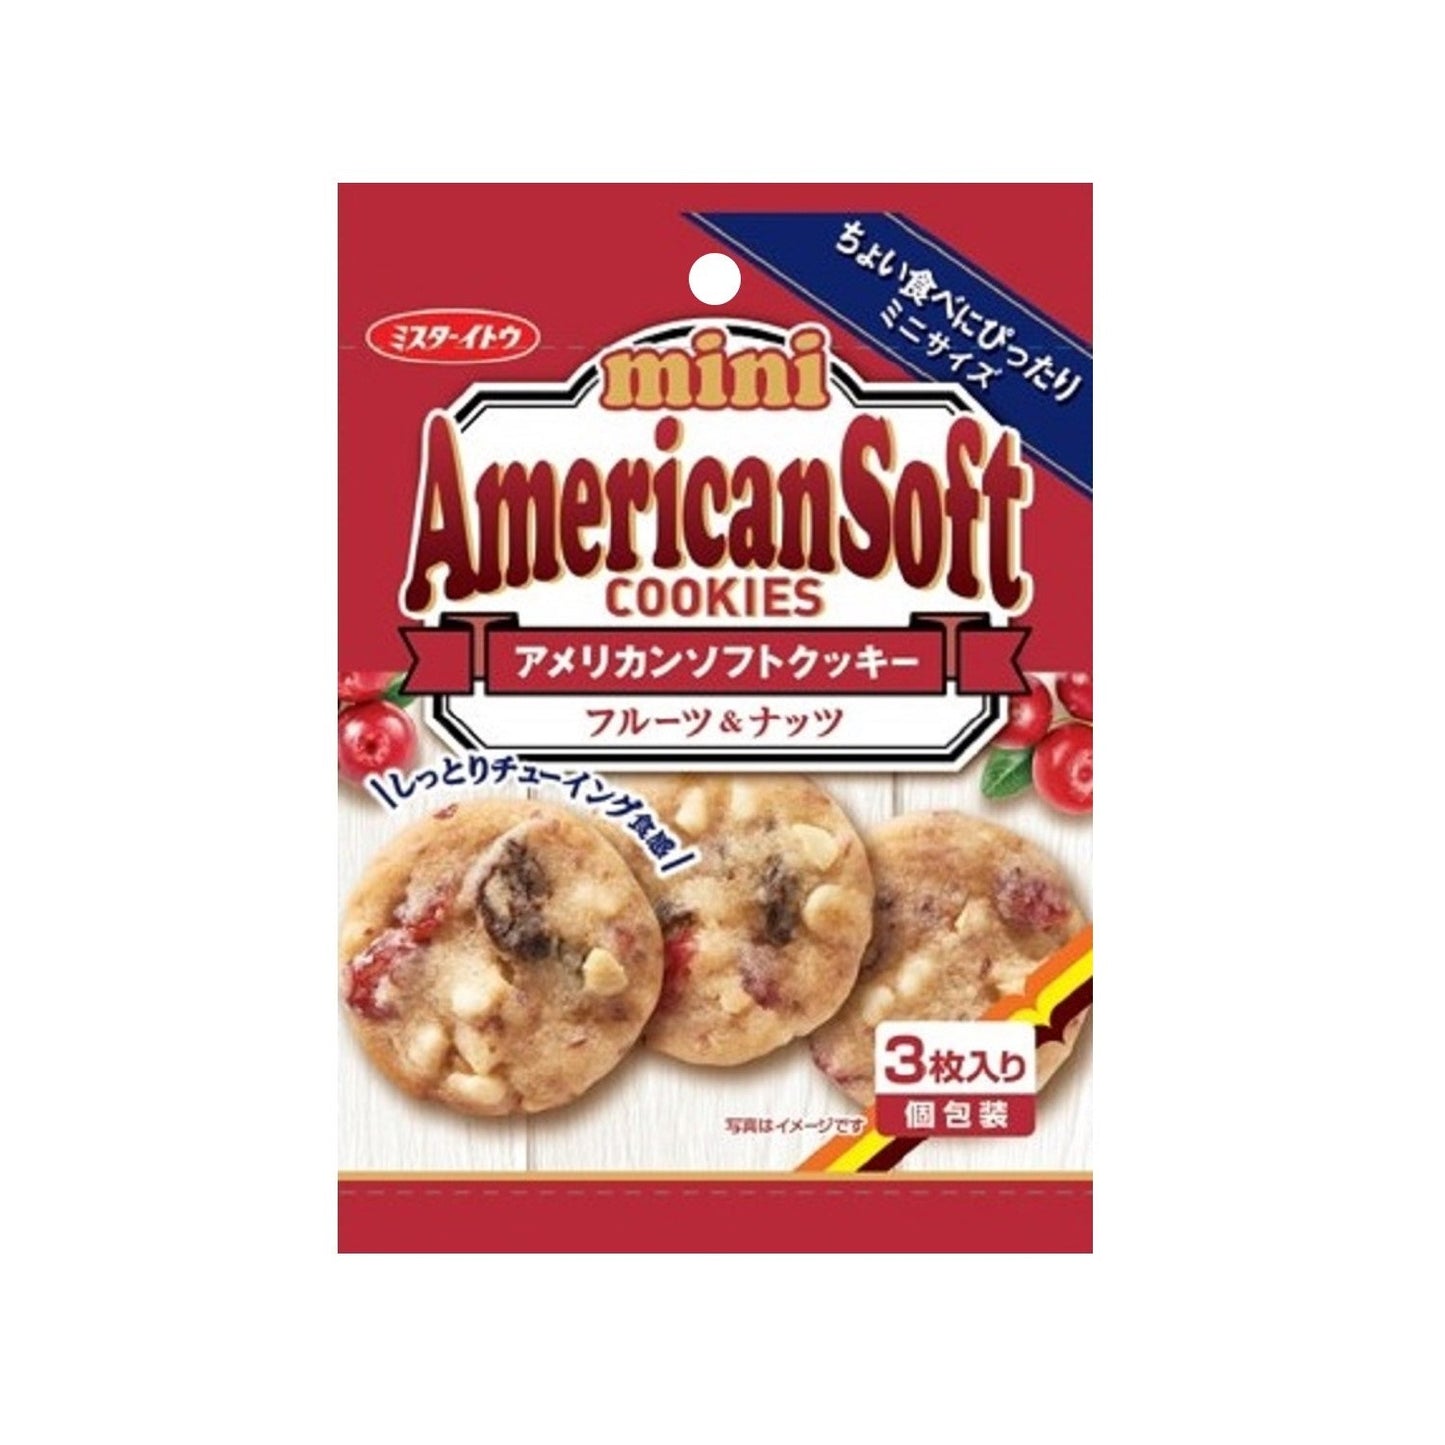 [ITO Biscuits][3 Mini American Soft Cookies Fruit & Nuts]